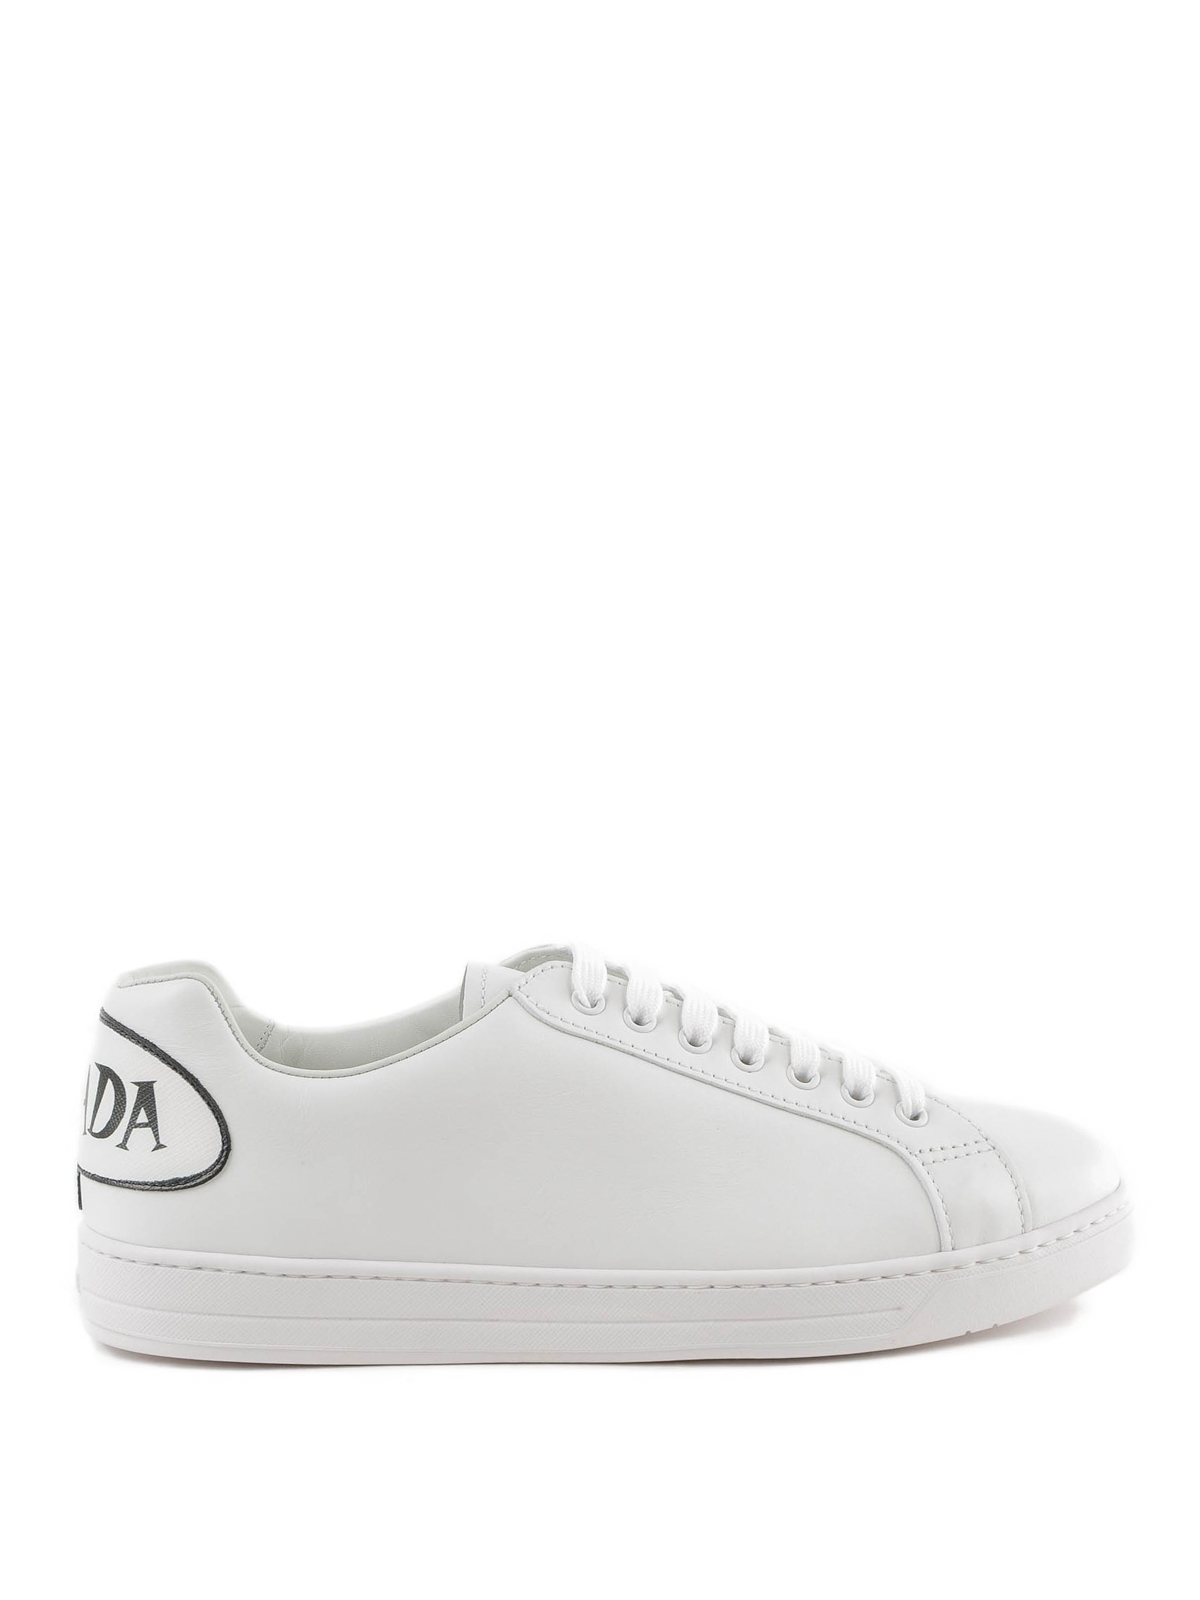 Trainers Prada - Comics patch detail white court sneakers 